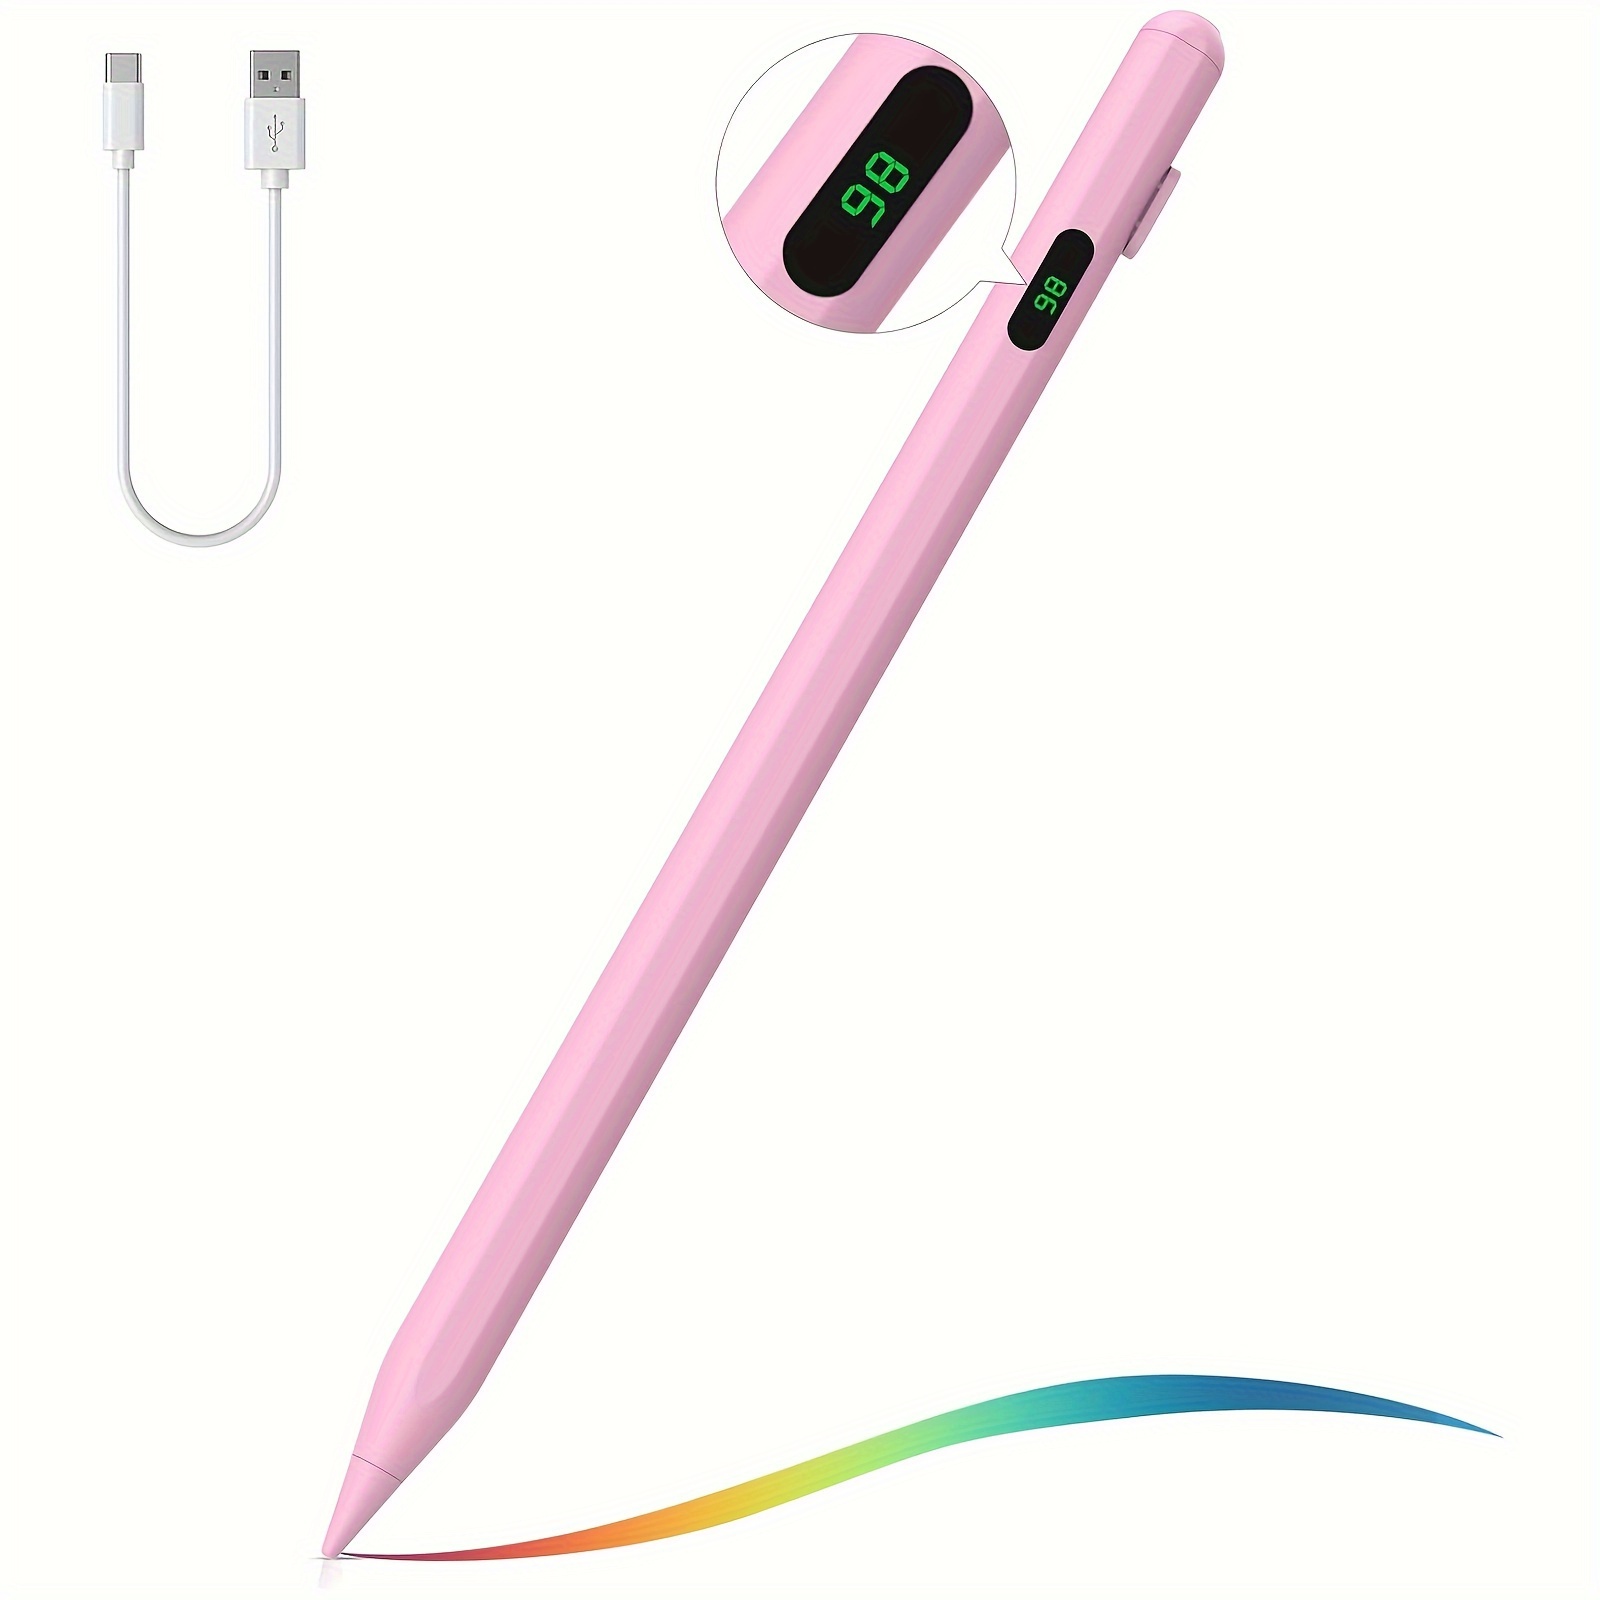 

Rechargeable Magnetic Stylus Pen: Universal Precision For Ipad/android - Portable And Durable